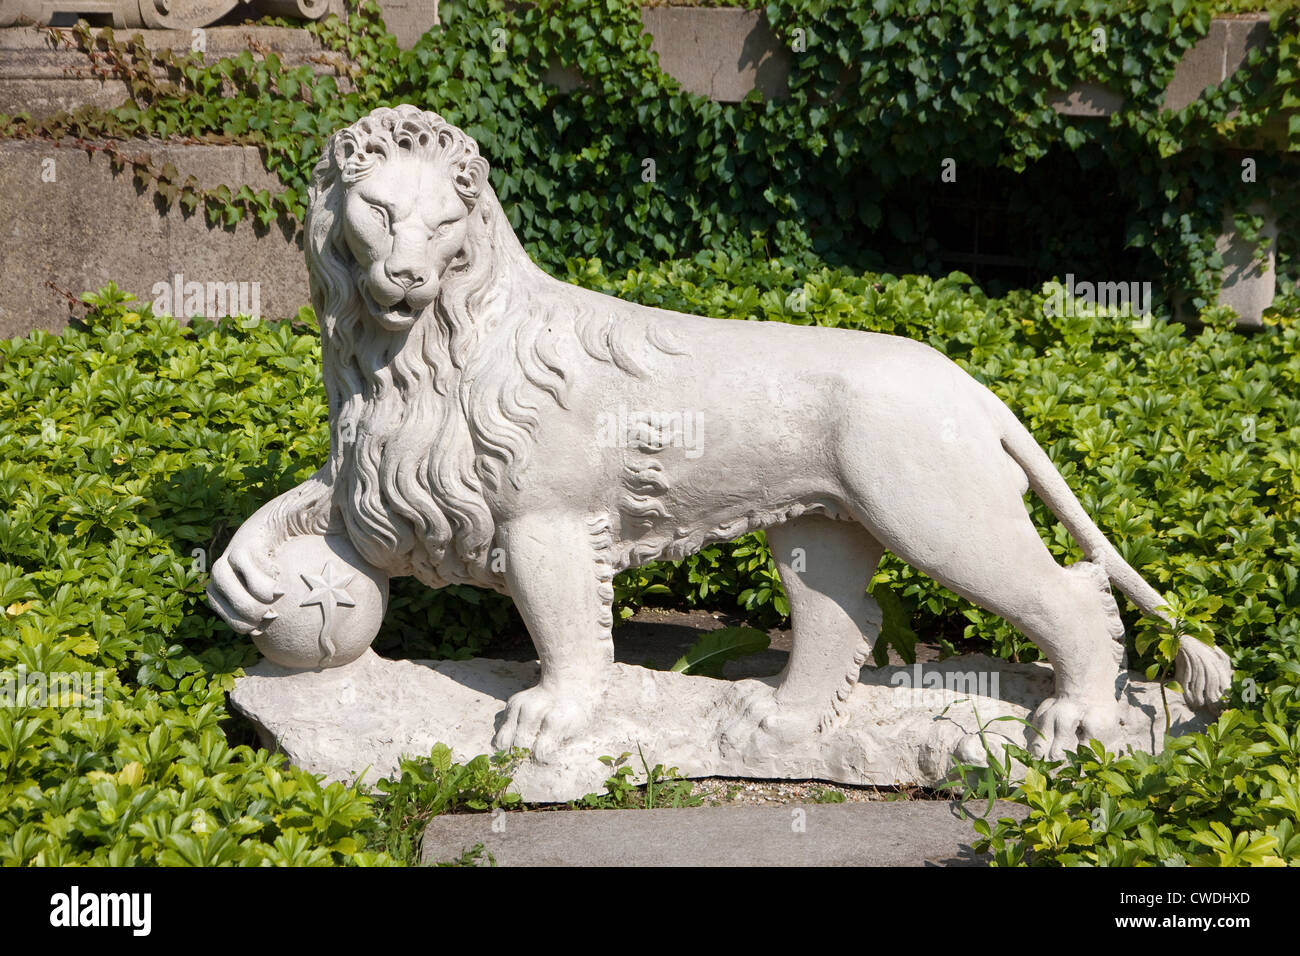 Lion statue at The Breakers Mansion in Newport, Rhode Island. Stock Photo